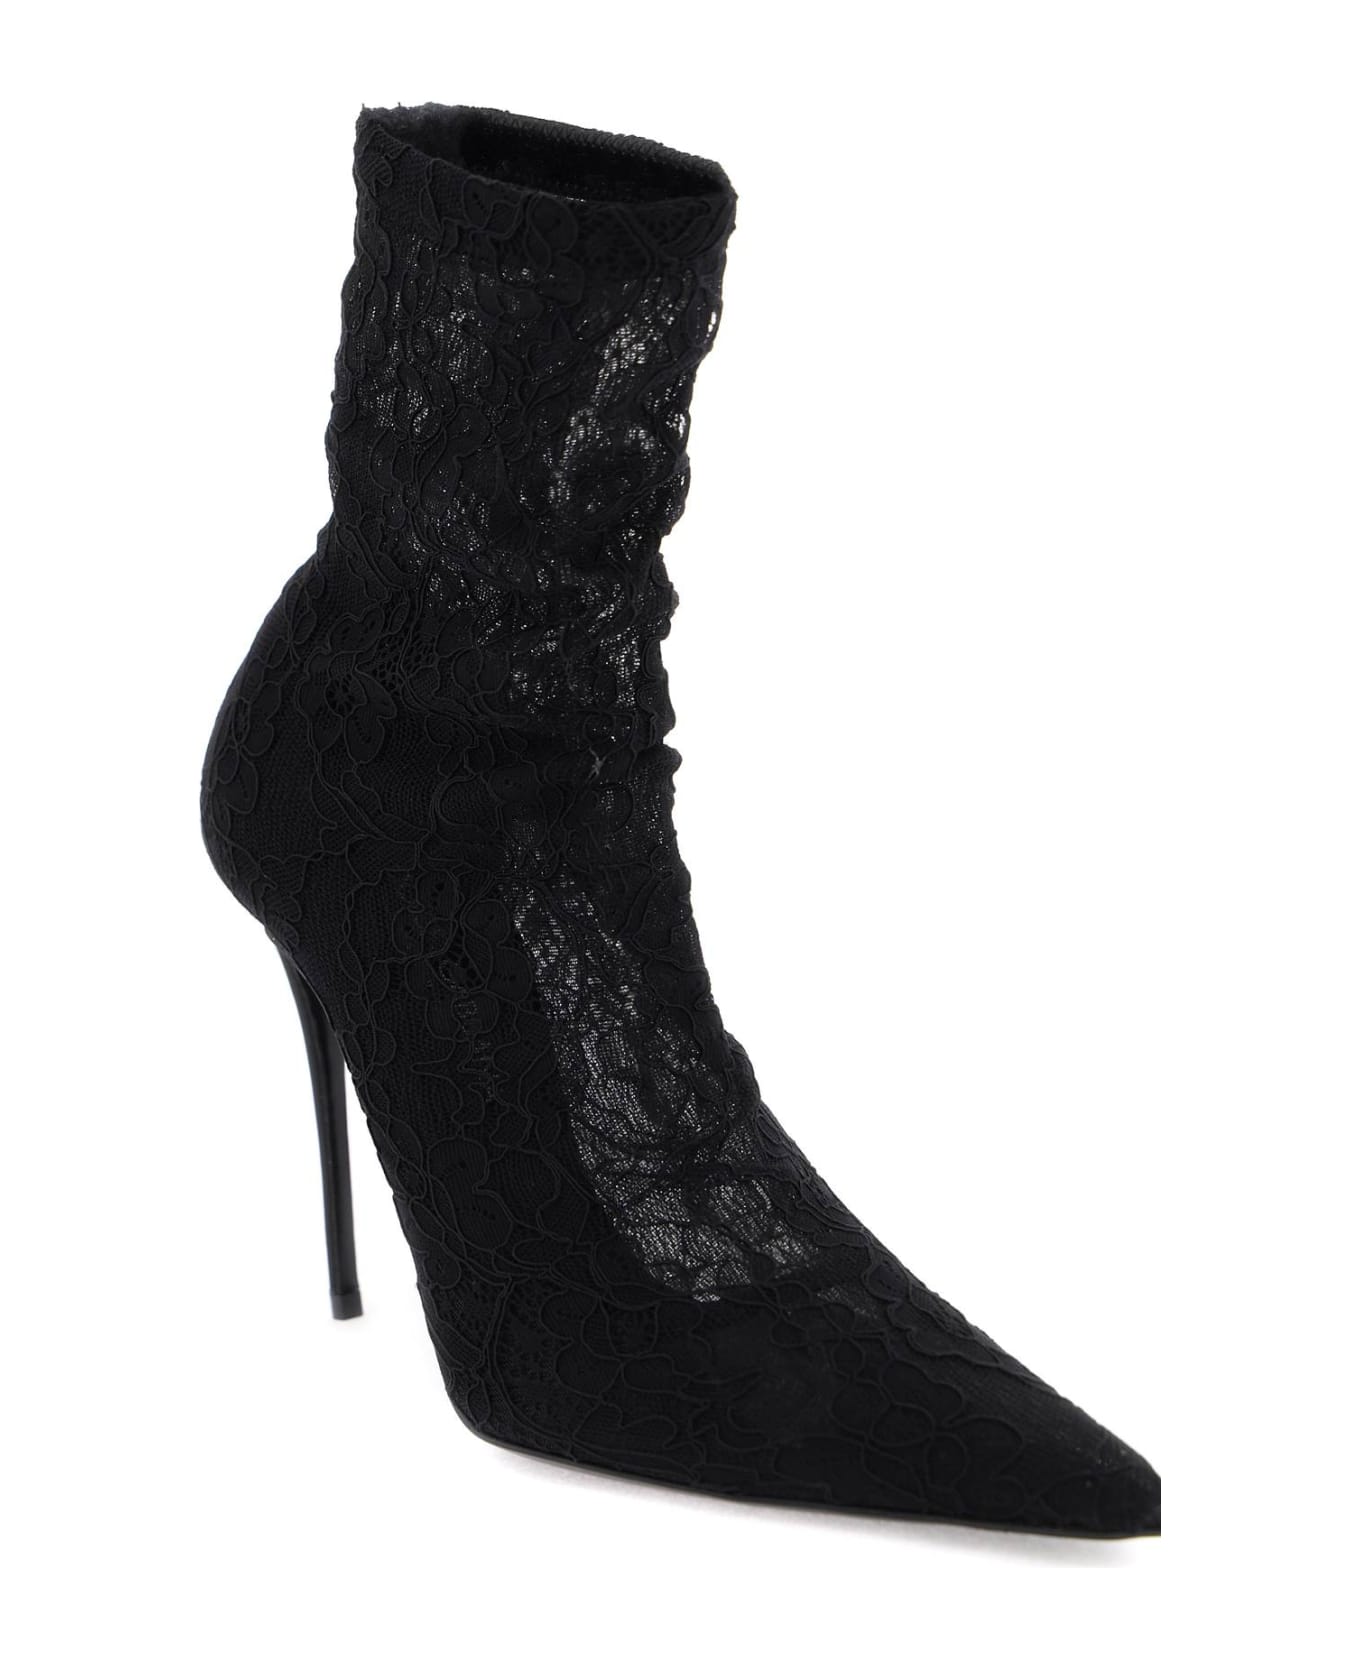 Dolce & Gabbana Lace Ankle Boots - Black ブーツ